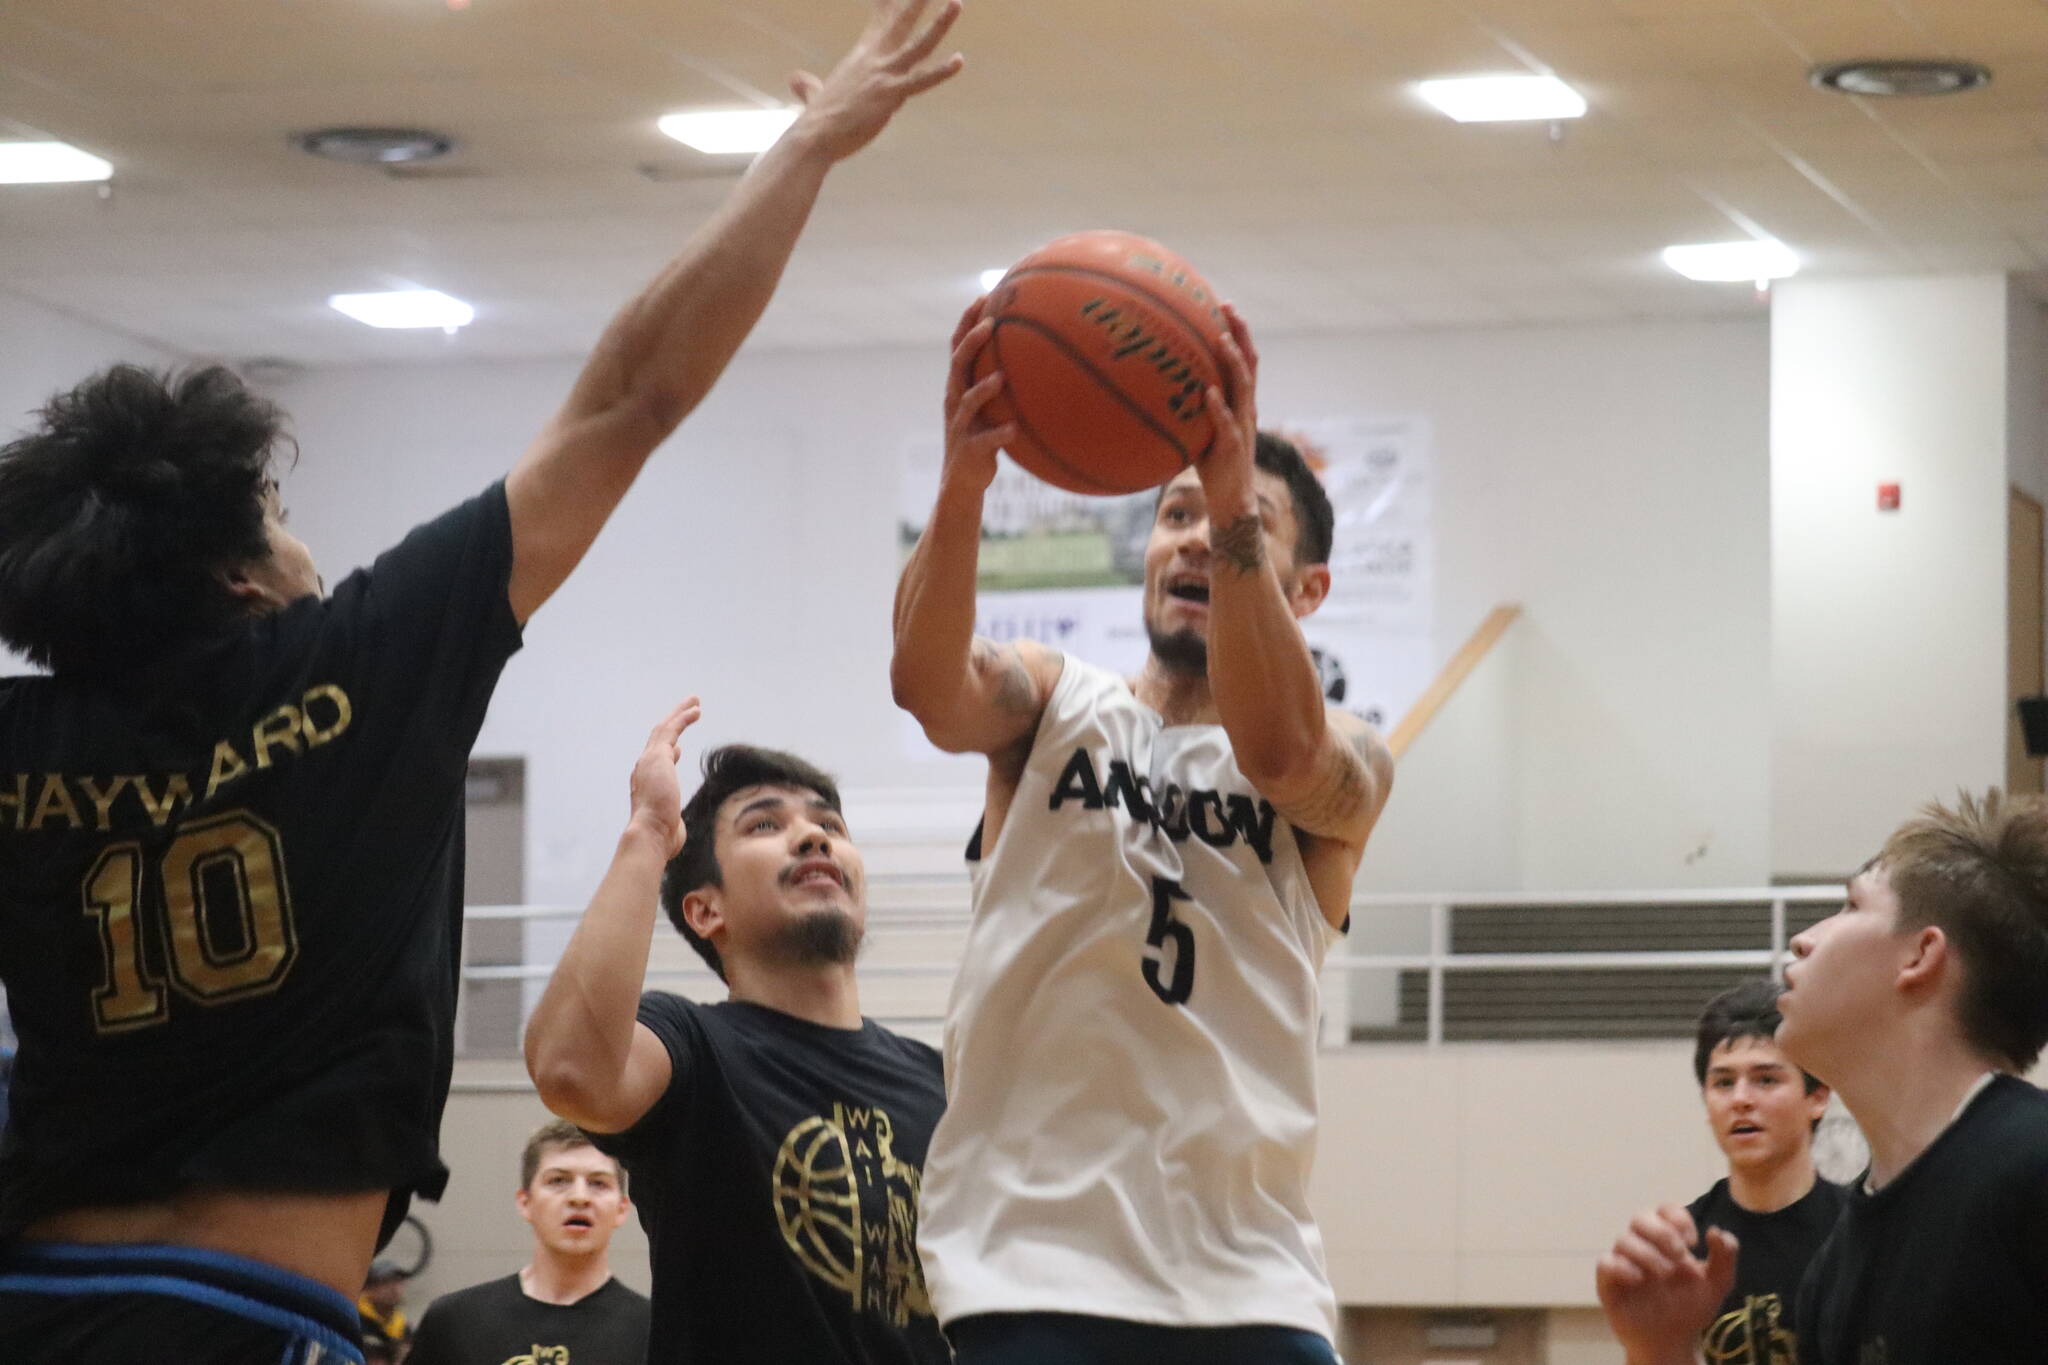 Angoon’s Aquino Brinson (5) drives the ball in for a layup on Wednesday against Metlakatla for a B bracket elimination game in this year’s Gold Medal basketball game. Brinson ended the game with a total of 25 points. (Jonson Kuhn / Juneau Empire)